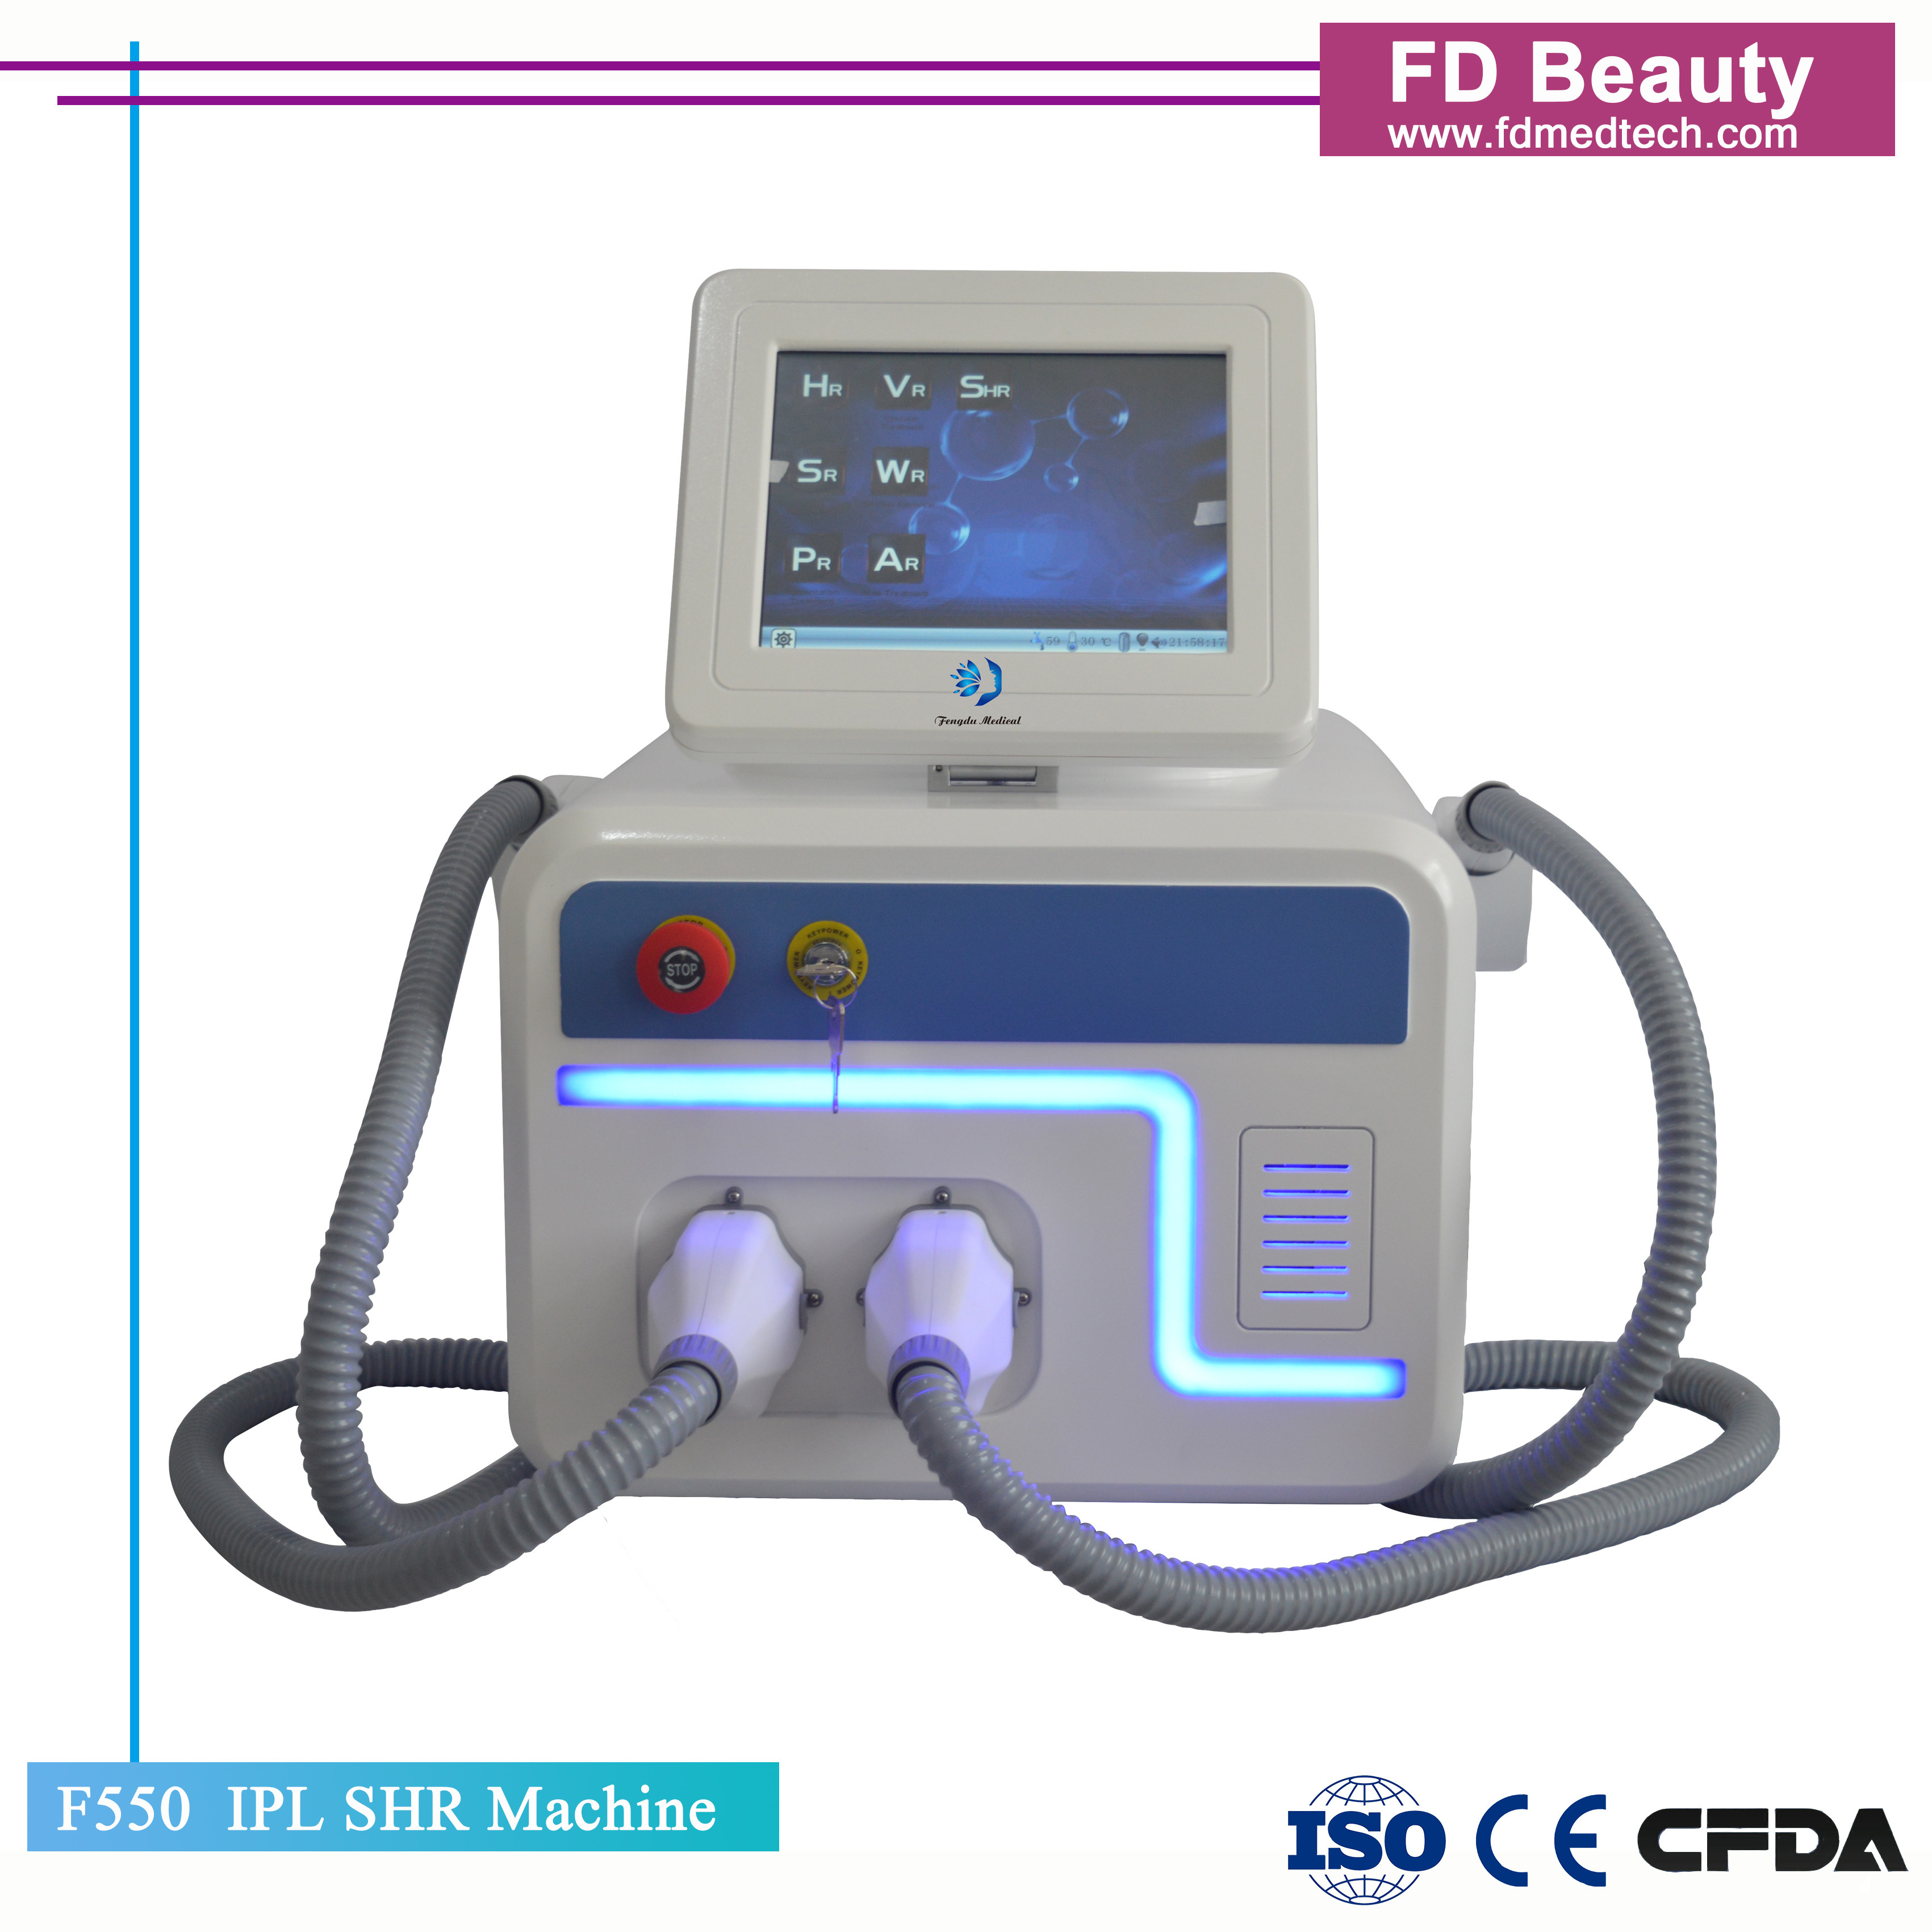 Portable Shr Hair Removal Opt IPL Shin Care Beauty Machine for clinic